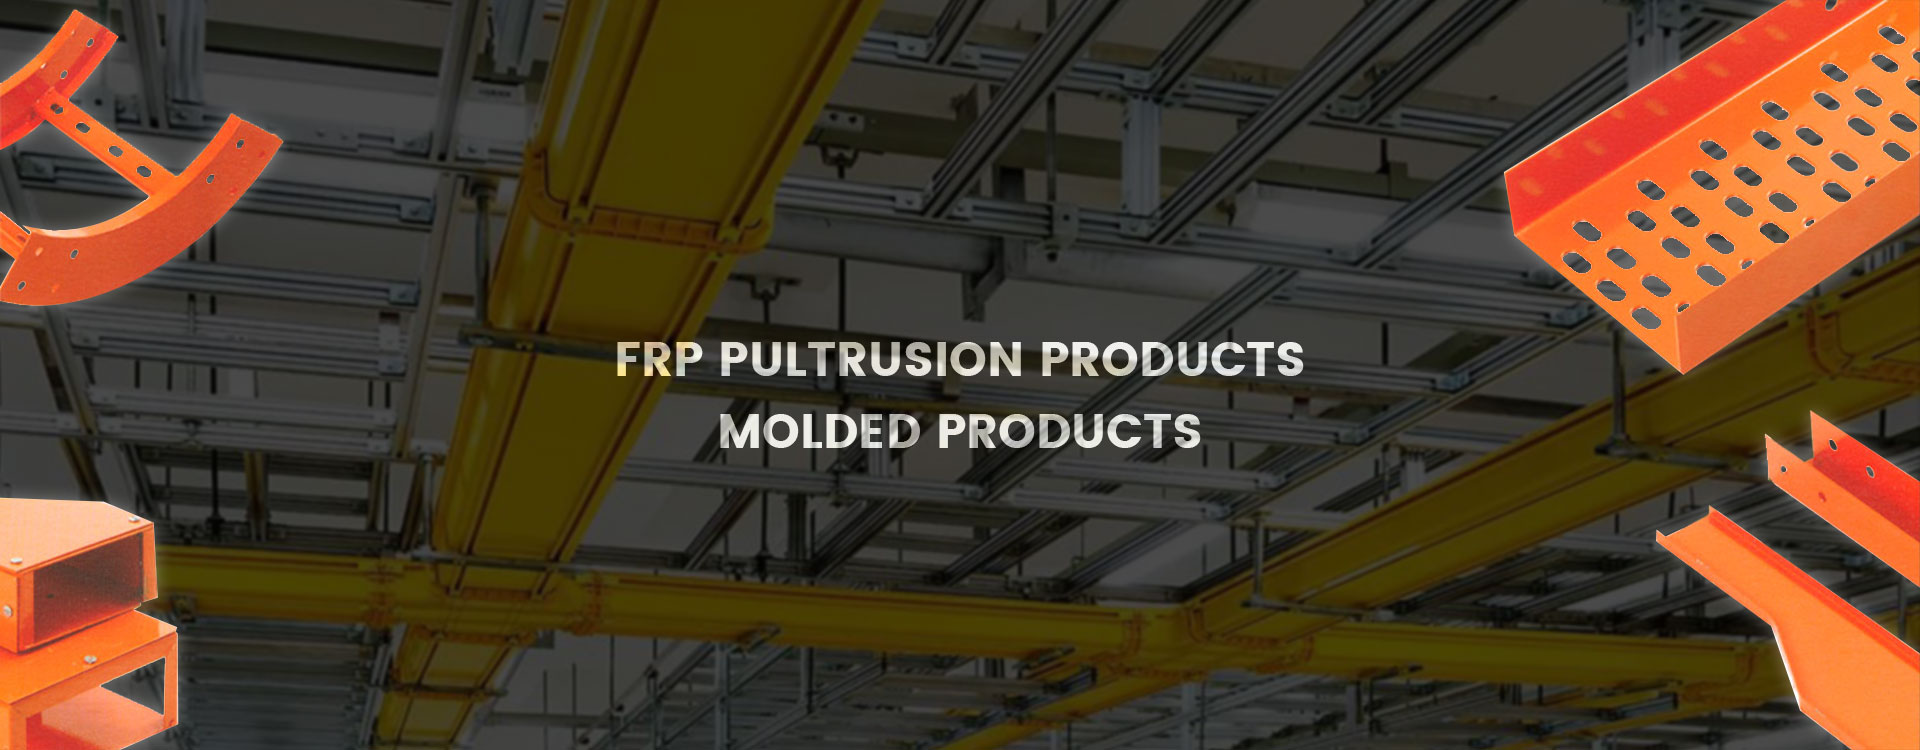 Frp pultrusion products molded products